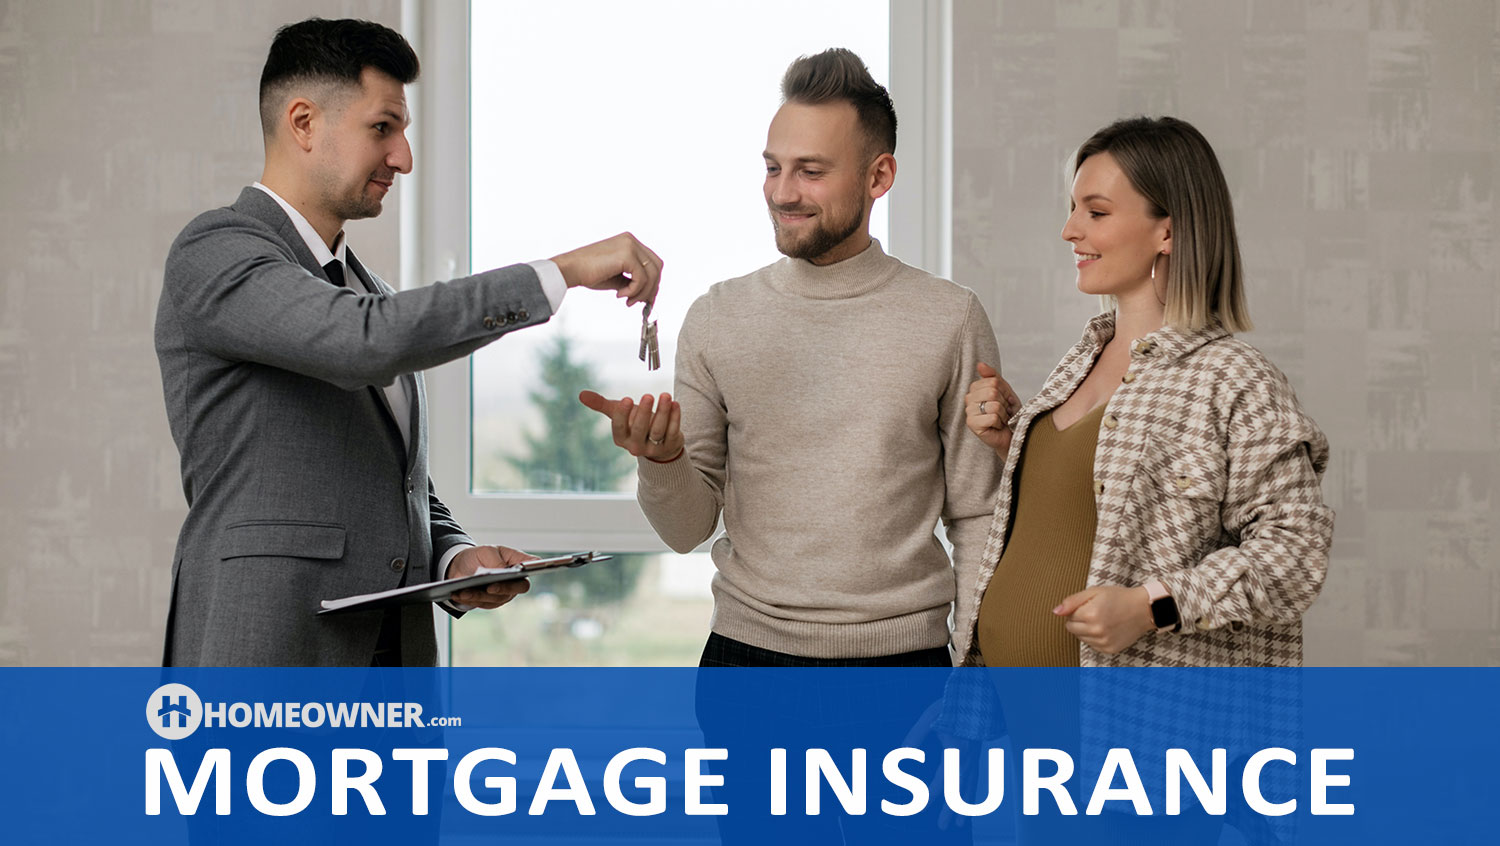 What Is Mortgage Insurance?